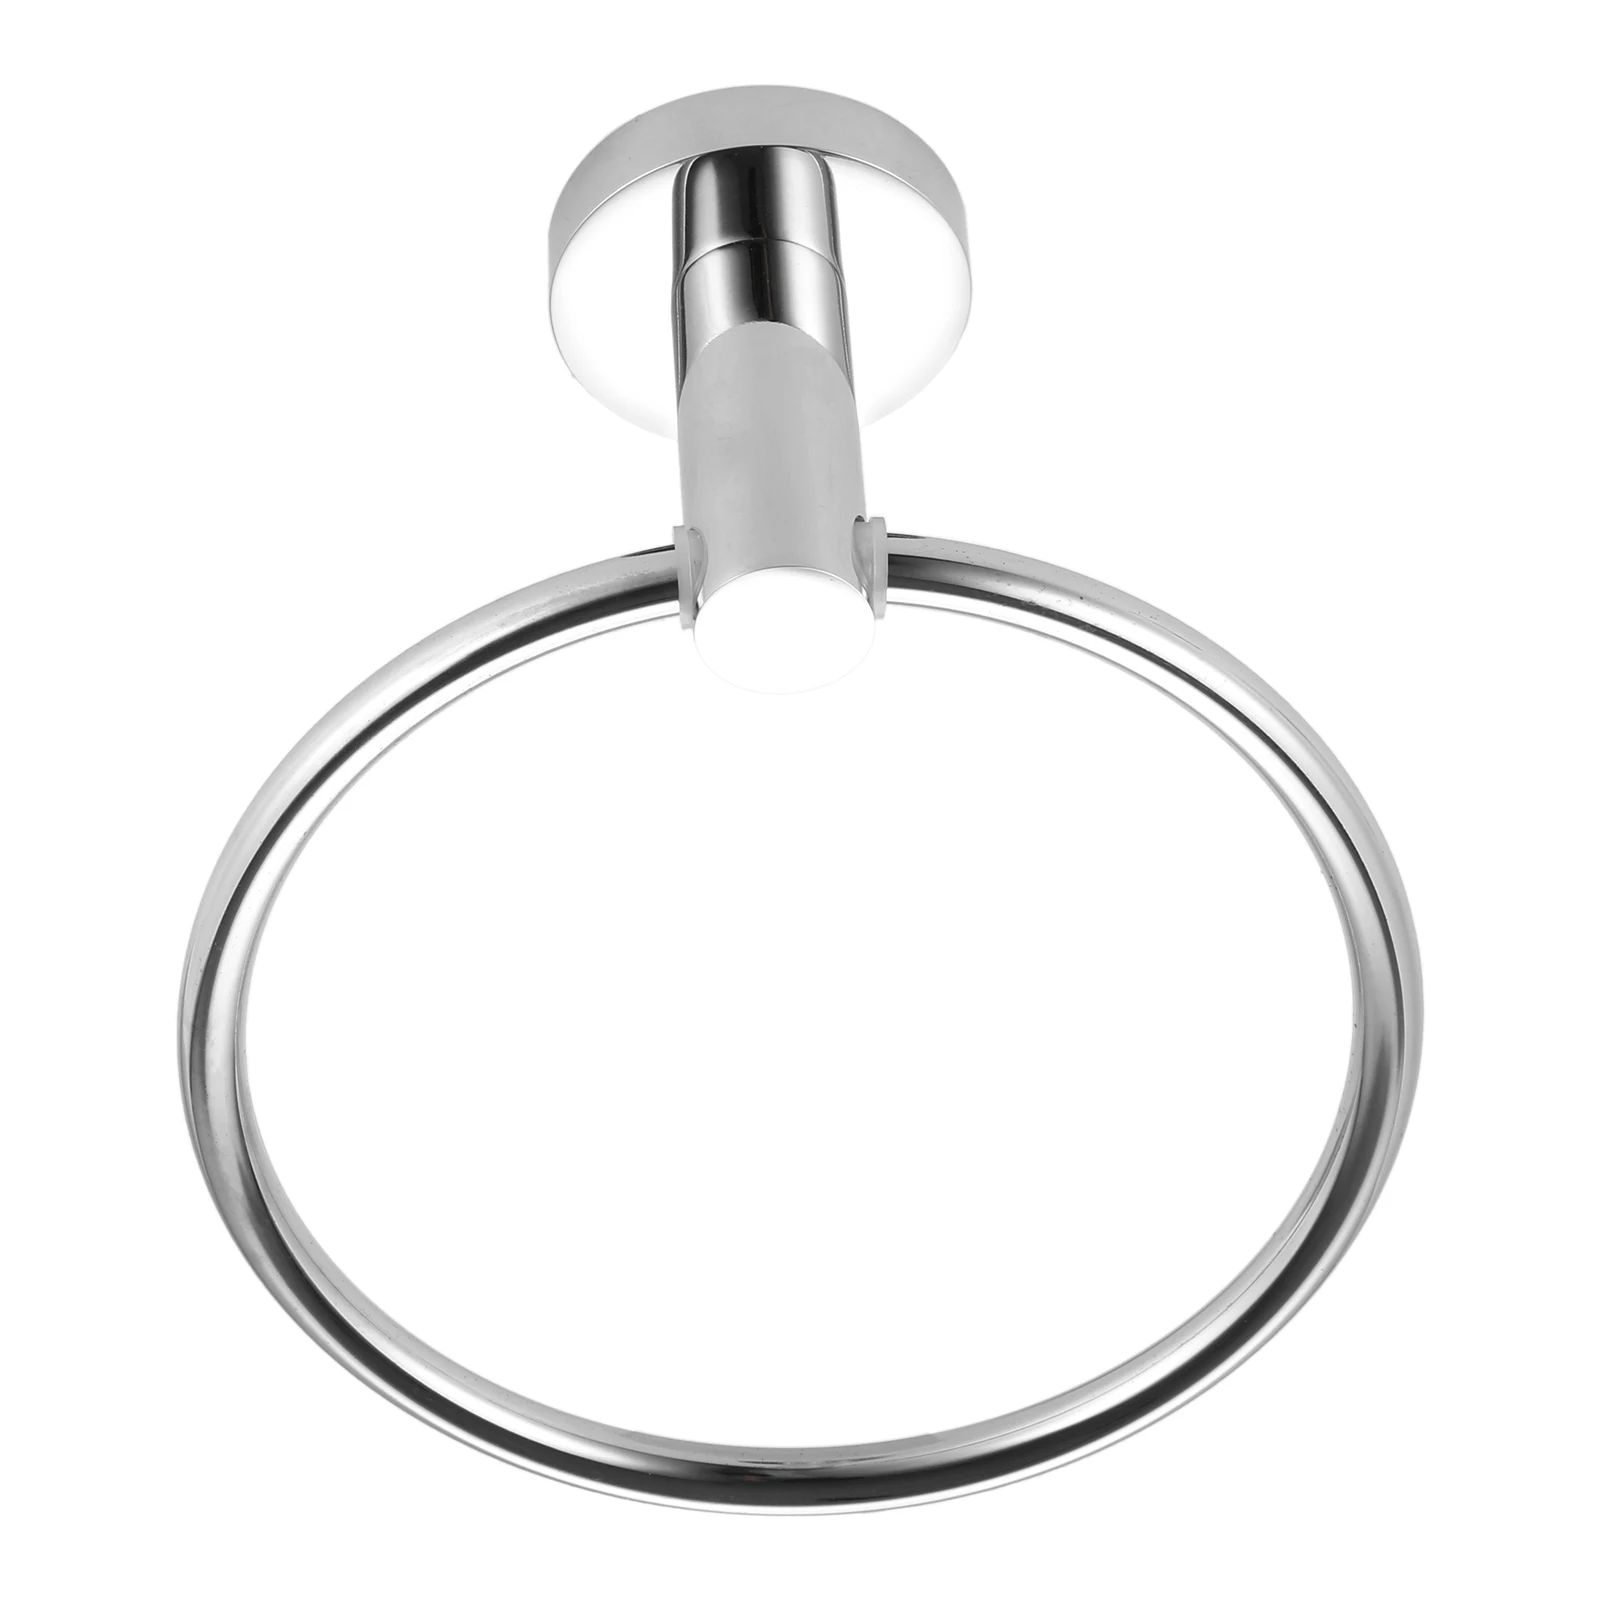 

1x Stainless Steel Towel Ring Holder Anticorrosive Hanger Chrome Wall Mounted Bathroom Home Hotel